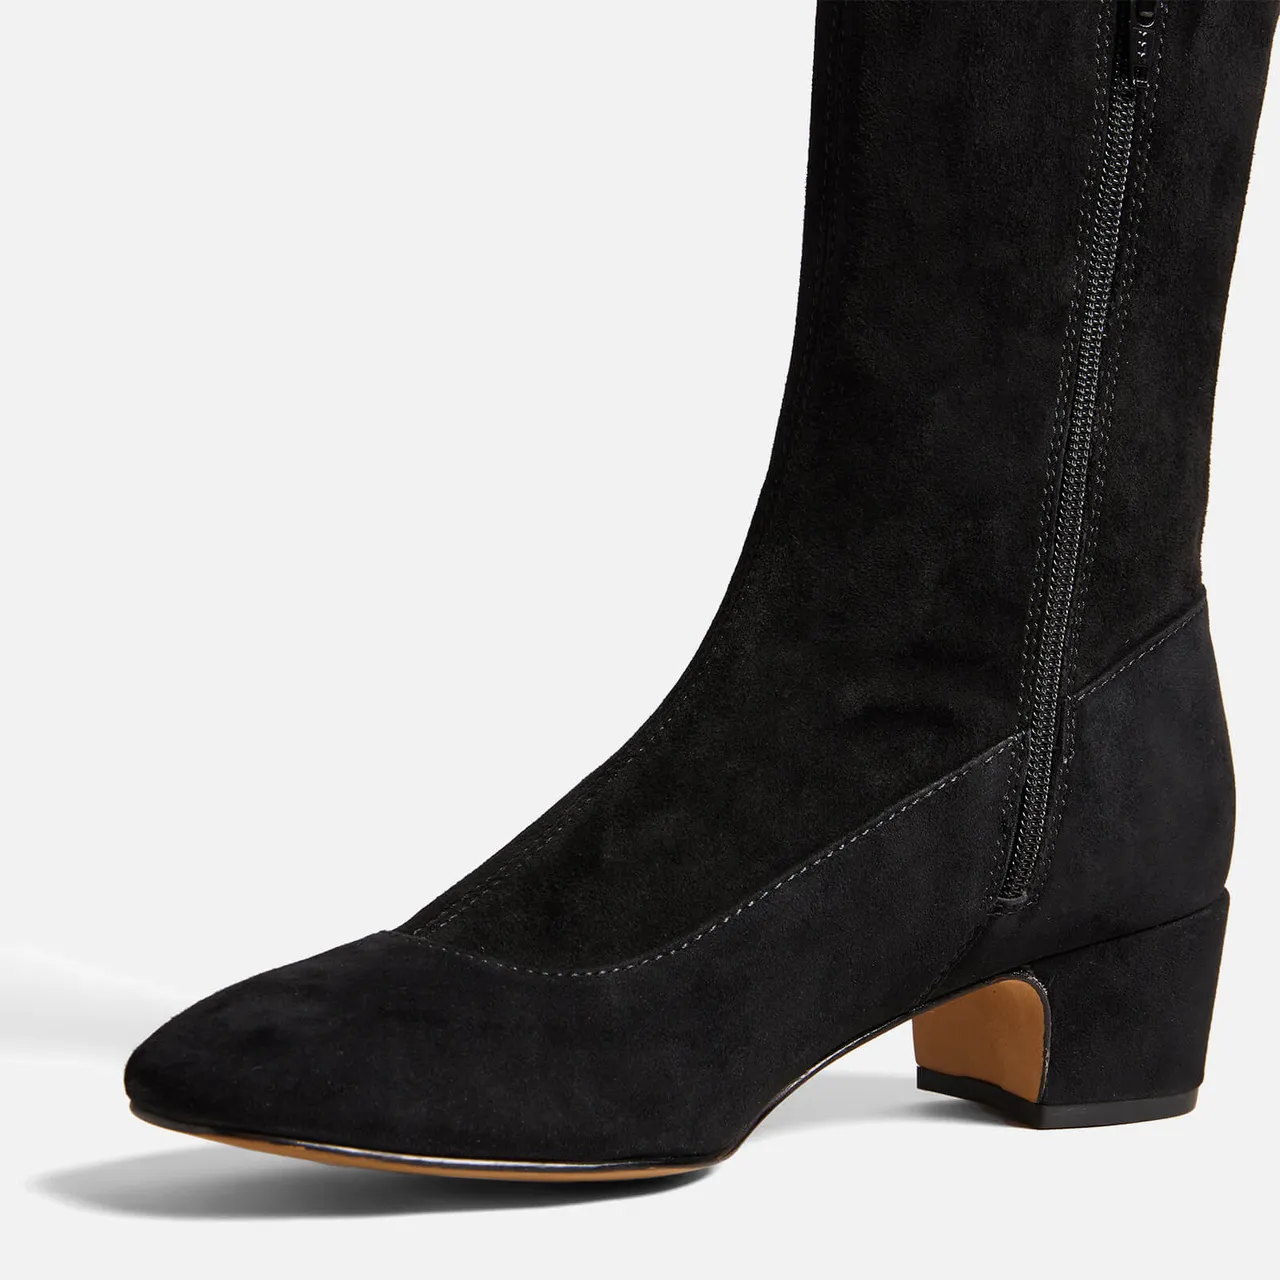 Ted Baker Ayannah Suede Knee High Boots - UK